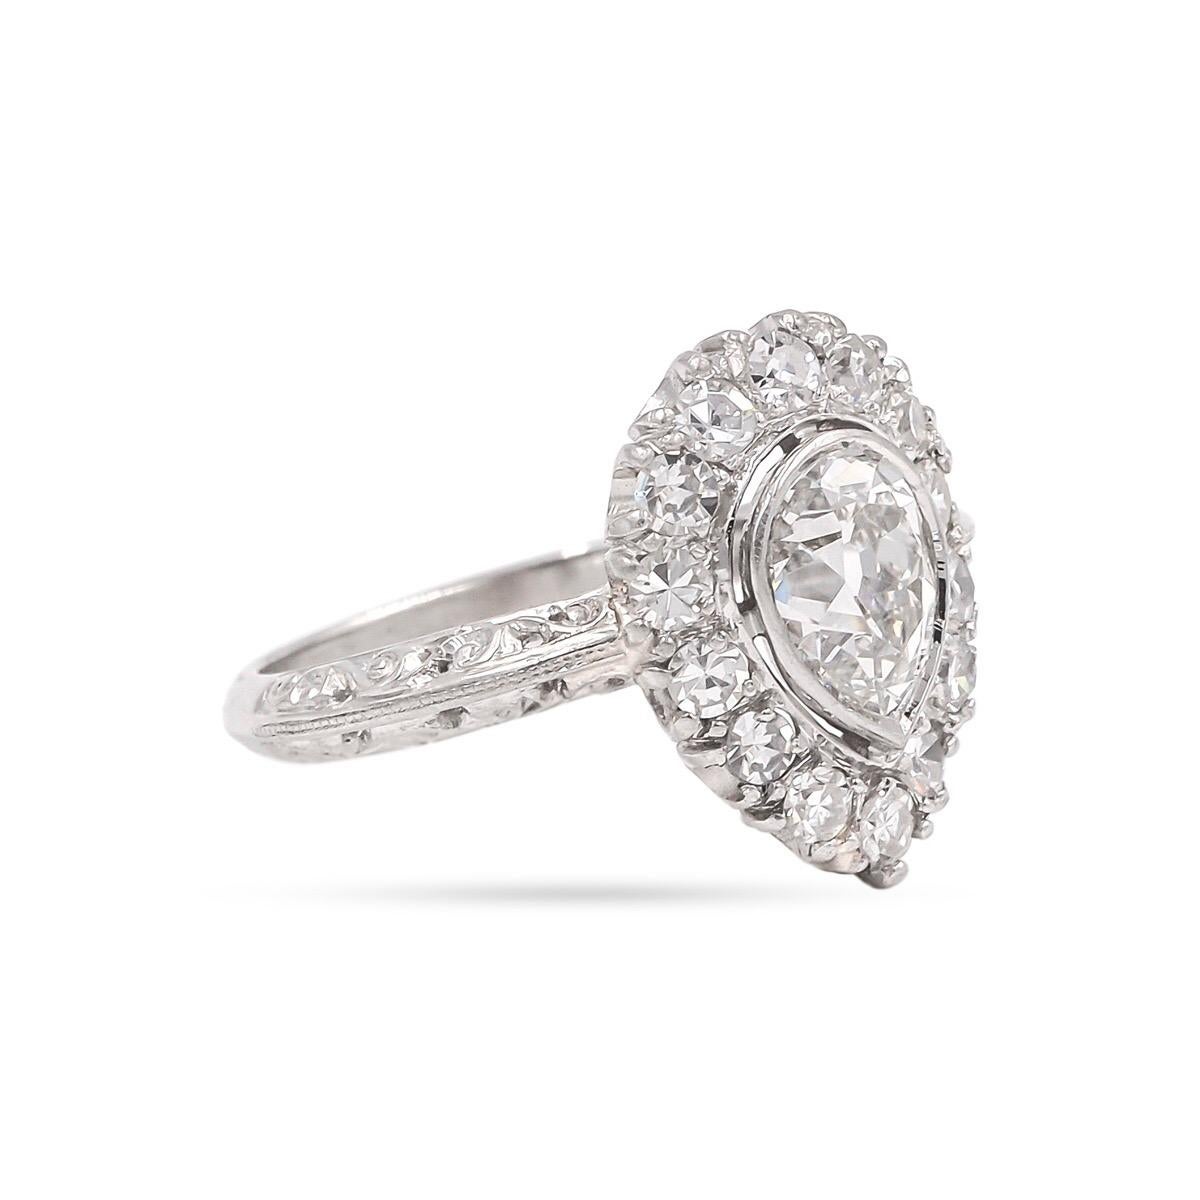 A unique Late Edwardian Era Cluster Ring. Composed of platinum. This Edwardian cluster ring (circa 1915) features a center stone 1.10 Ct. Antique Pear Shape Diamond. Surrounded by 14 Old Single Cut Diamonds weighing 0.50 Ct. in total. The shank of